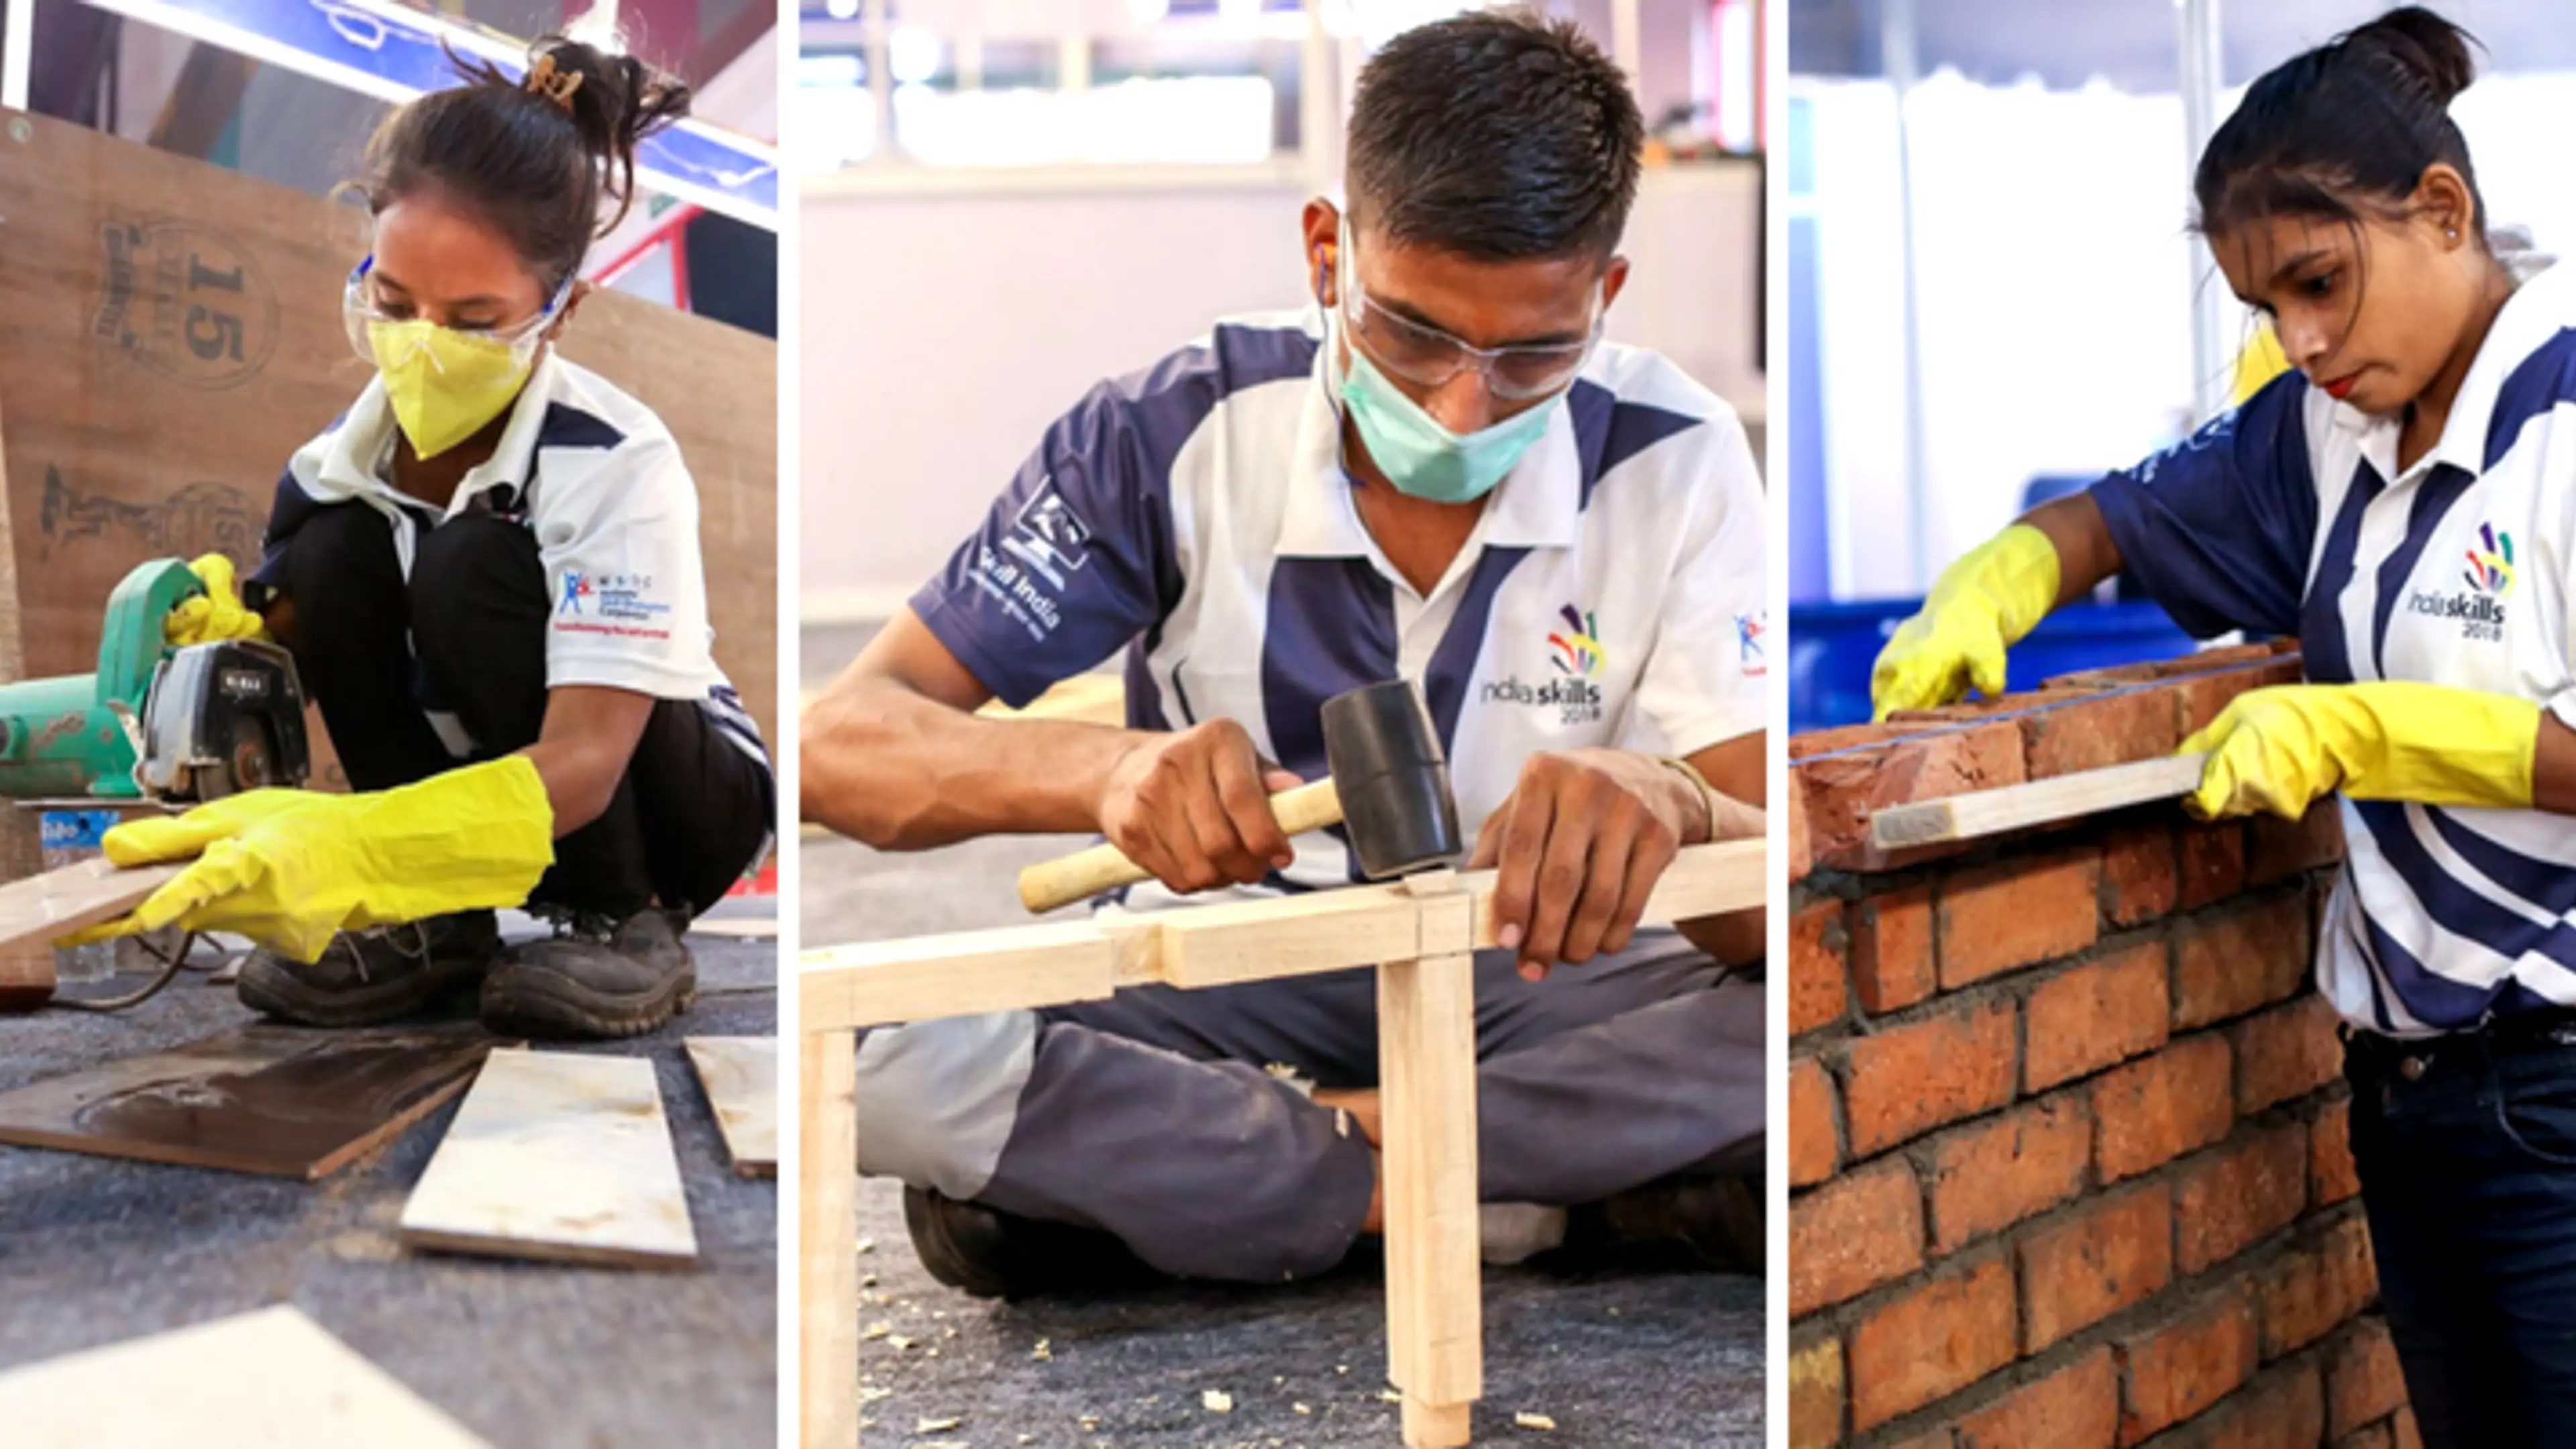 Back to Skills – These startups lend a helping hand, skill youth for employment